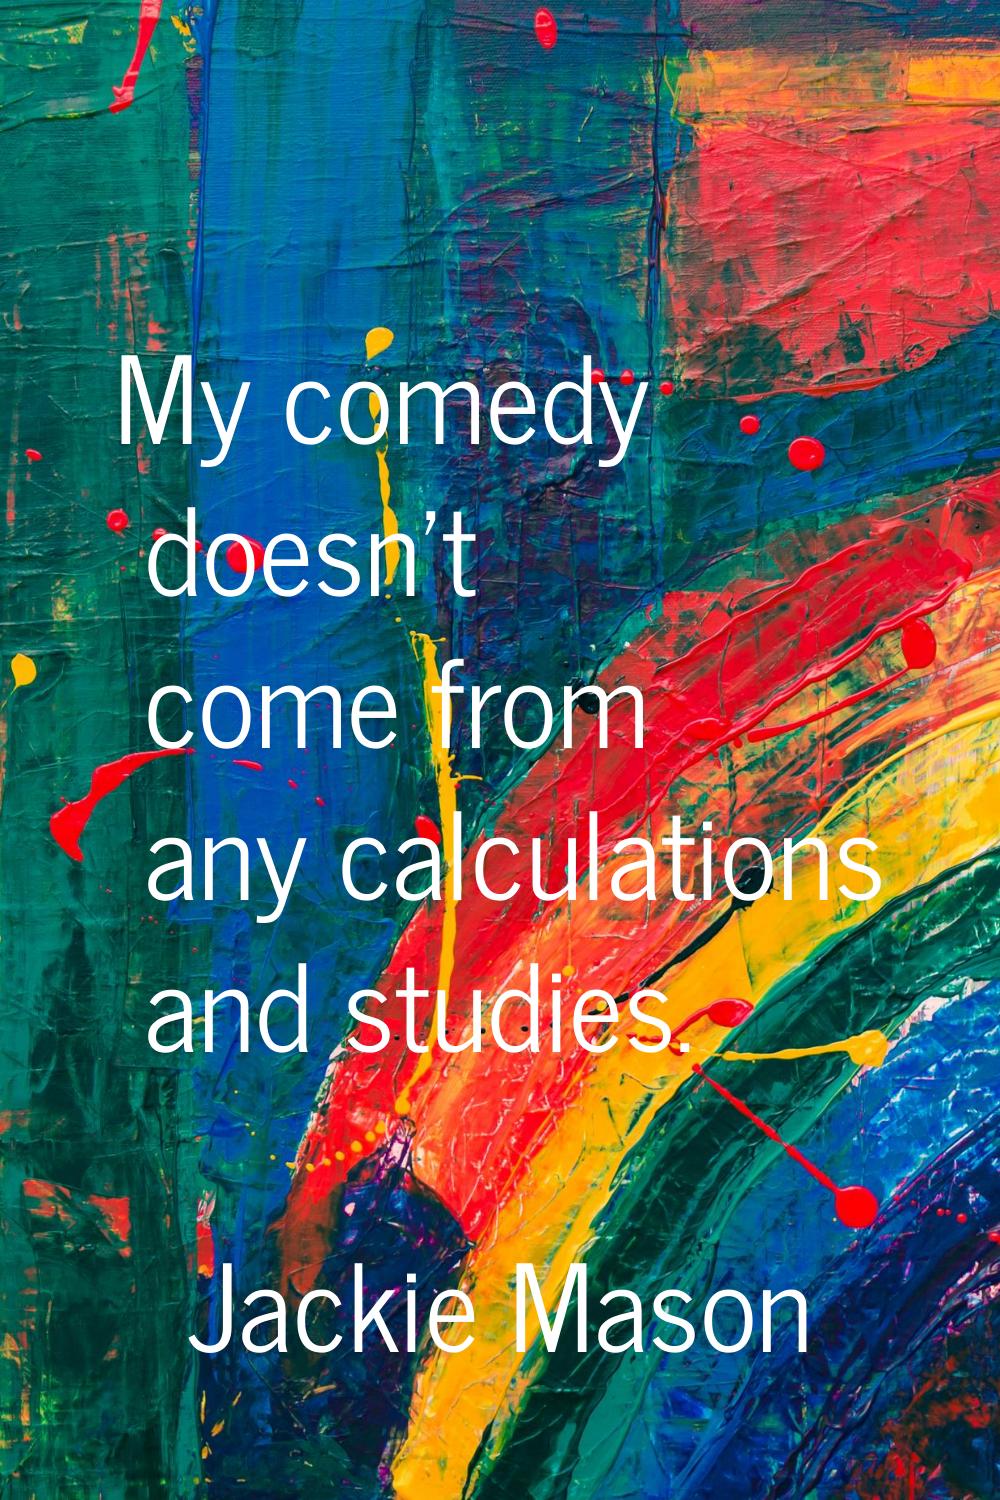 My comedy doesn't come from any calculations and studies.